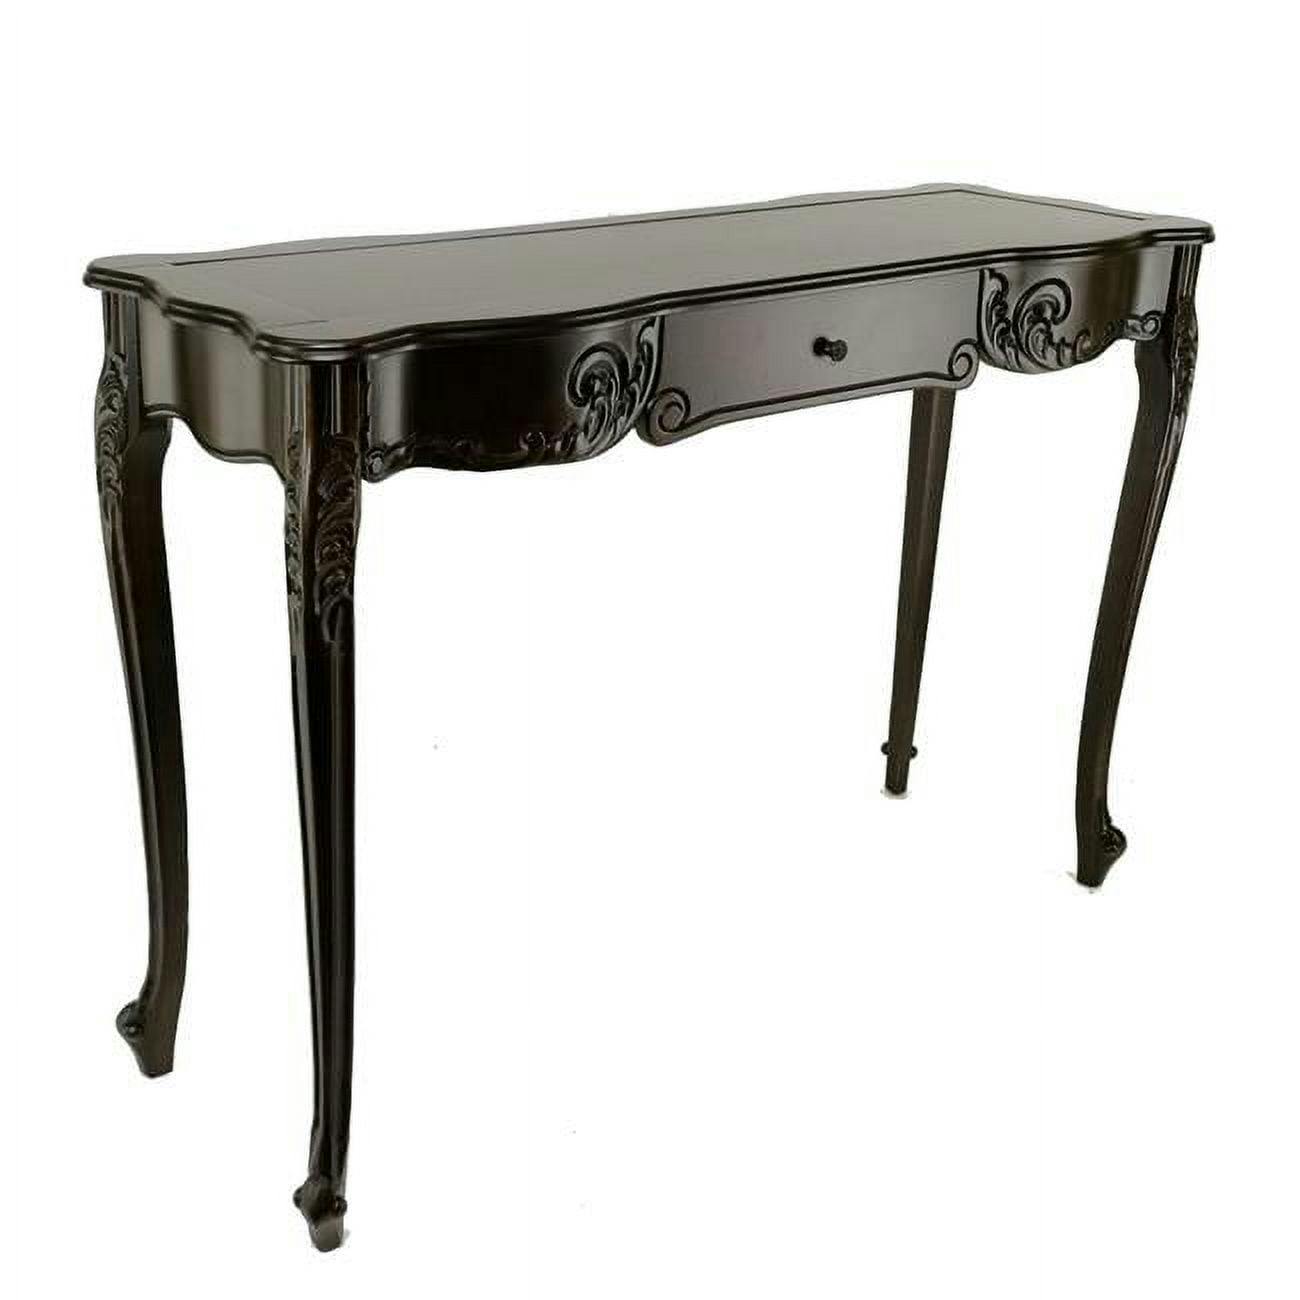 Troy Elegance 32" Dark Brown Birch Wood Console Table with Floral Carvings